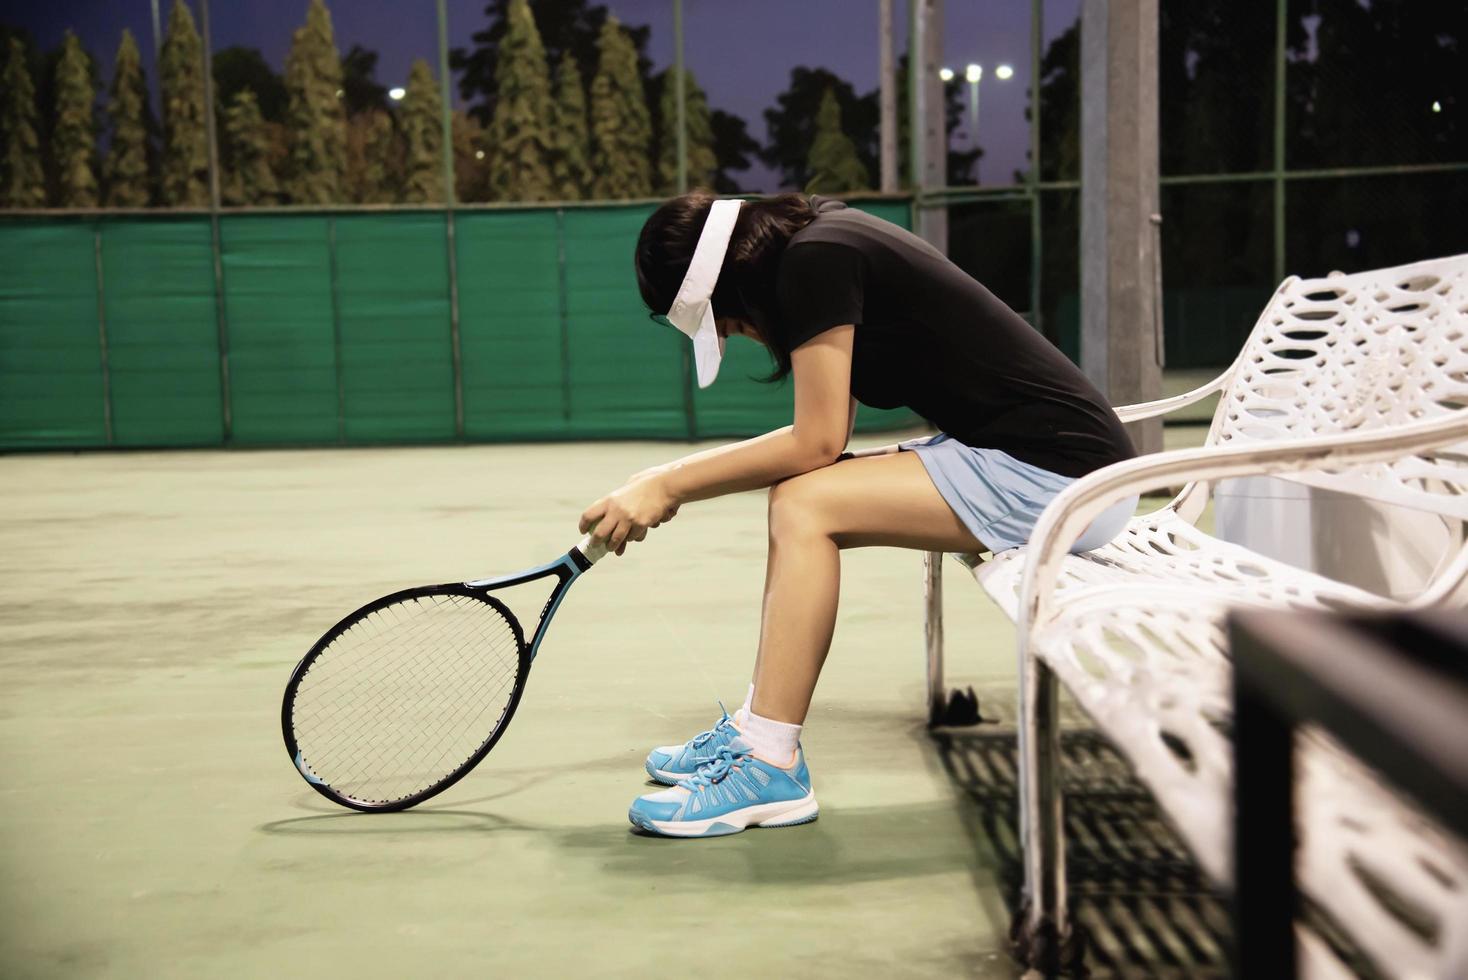 Sad lady tennis player sitting in the court after lose a match - people in sport tennis game concept photo